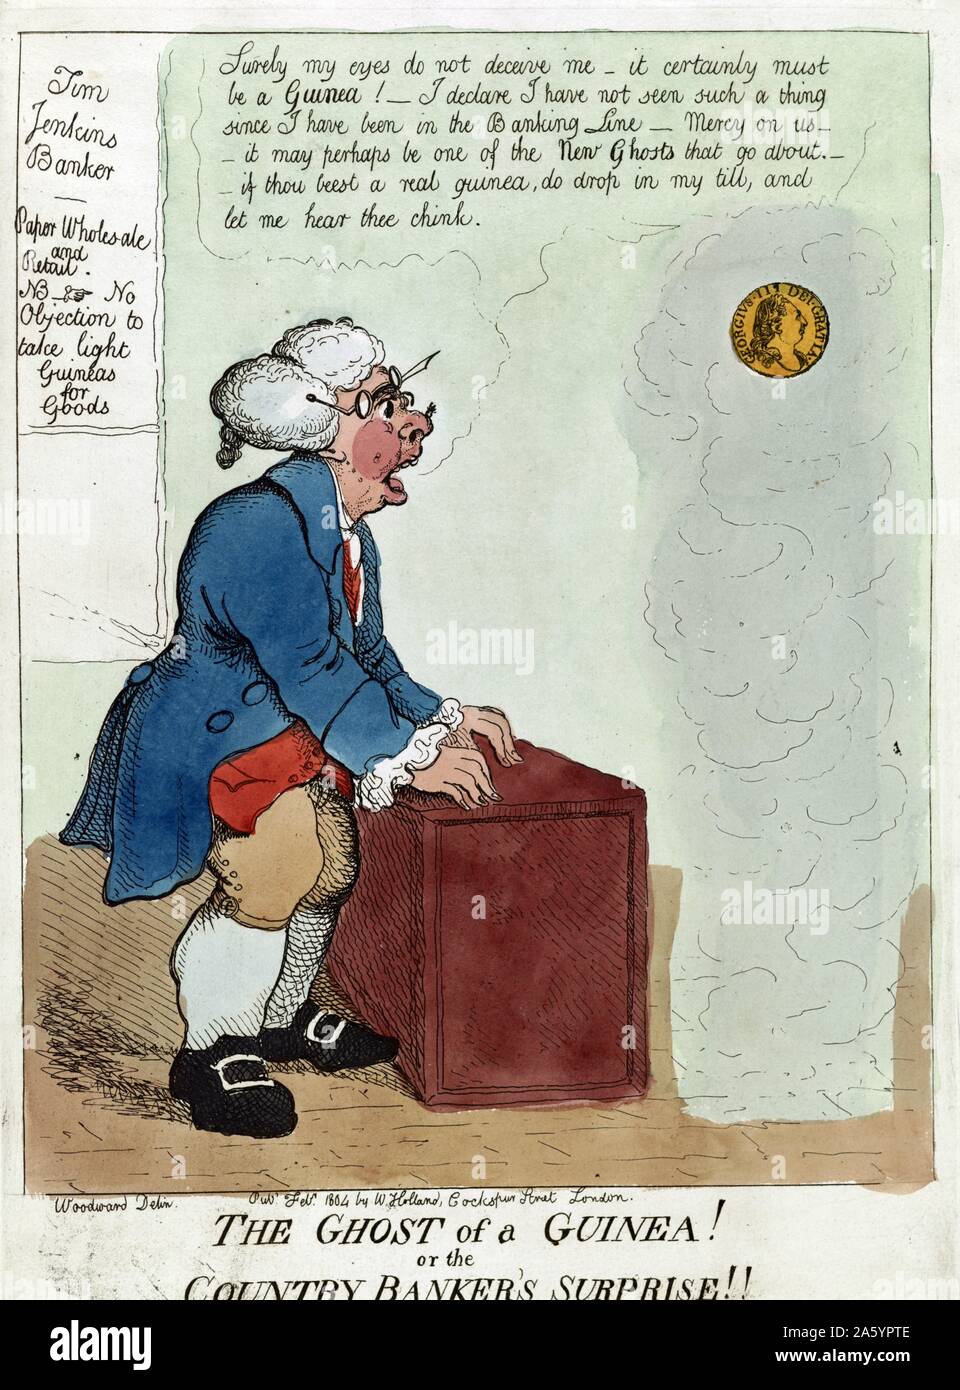 The ghost of a guinea or the country's surprise! Artist, George Moutard Woodward (1760-1809). Print shows a banker astonished to by a guinea coin with King George III on it. The banker says, 'Surely my eyes do not deceive me - it certainly must be a guinea, I declare I have not seen such a thing since I have been in the Banking Line - Mercy on us - it may perhaps be one of the new ghosts that go about - if thou beest a real guinea do drop in my till, and let me hear thee chink., February c.1804. Stock Photo